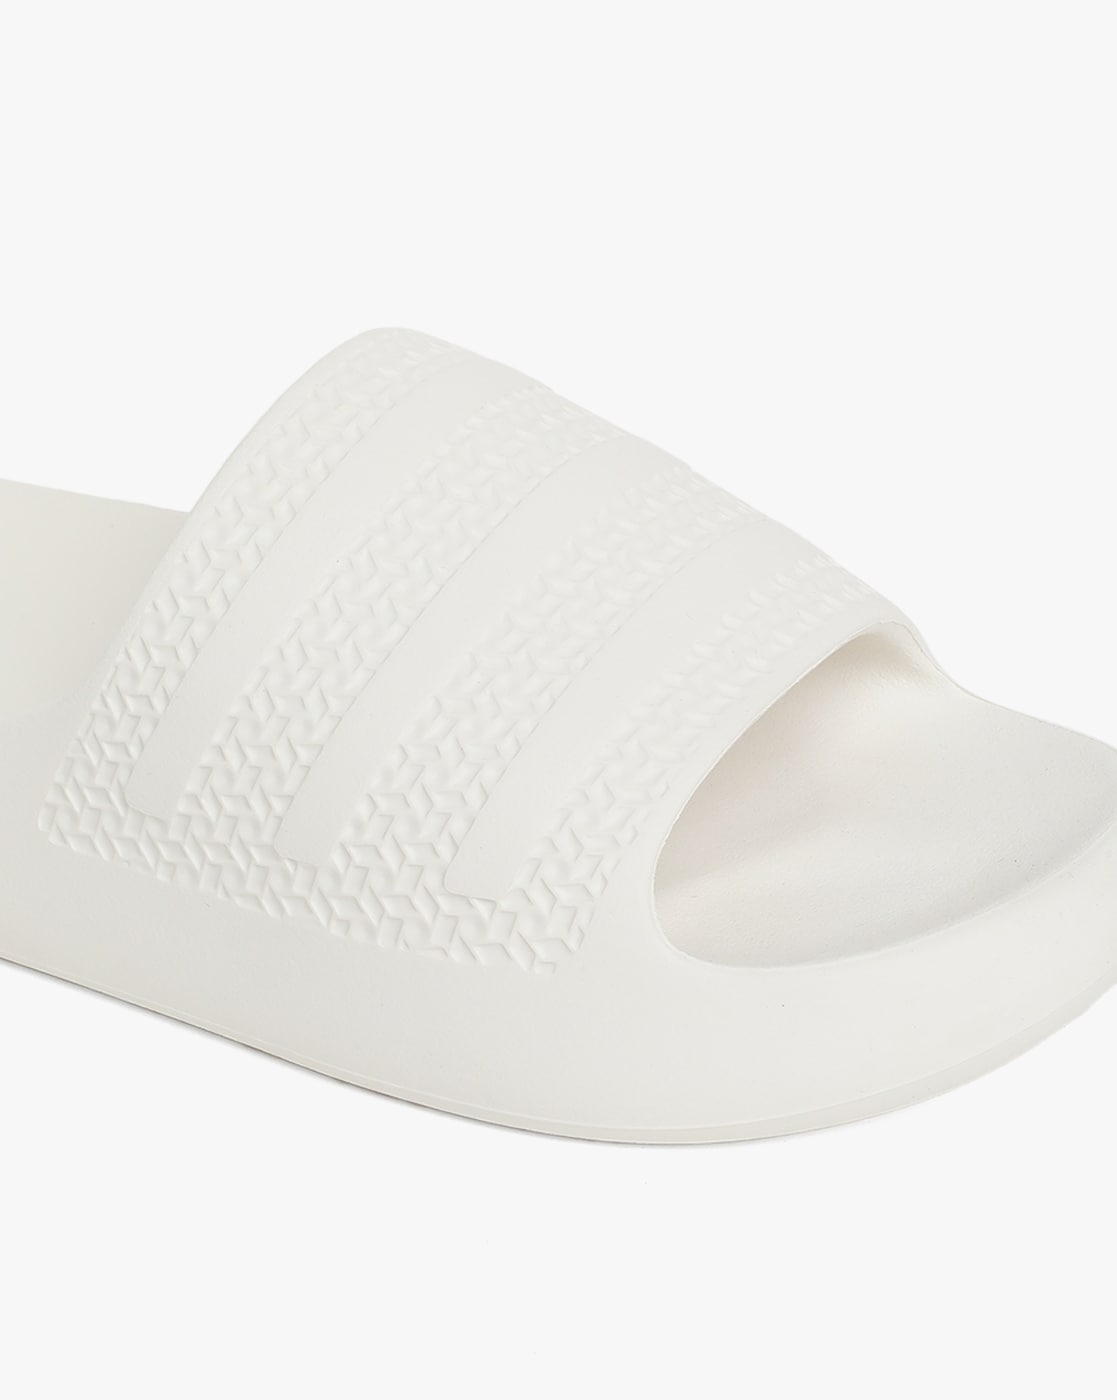 Explore 204+ adidas slippers for women